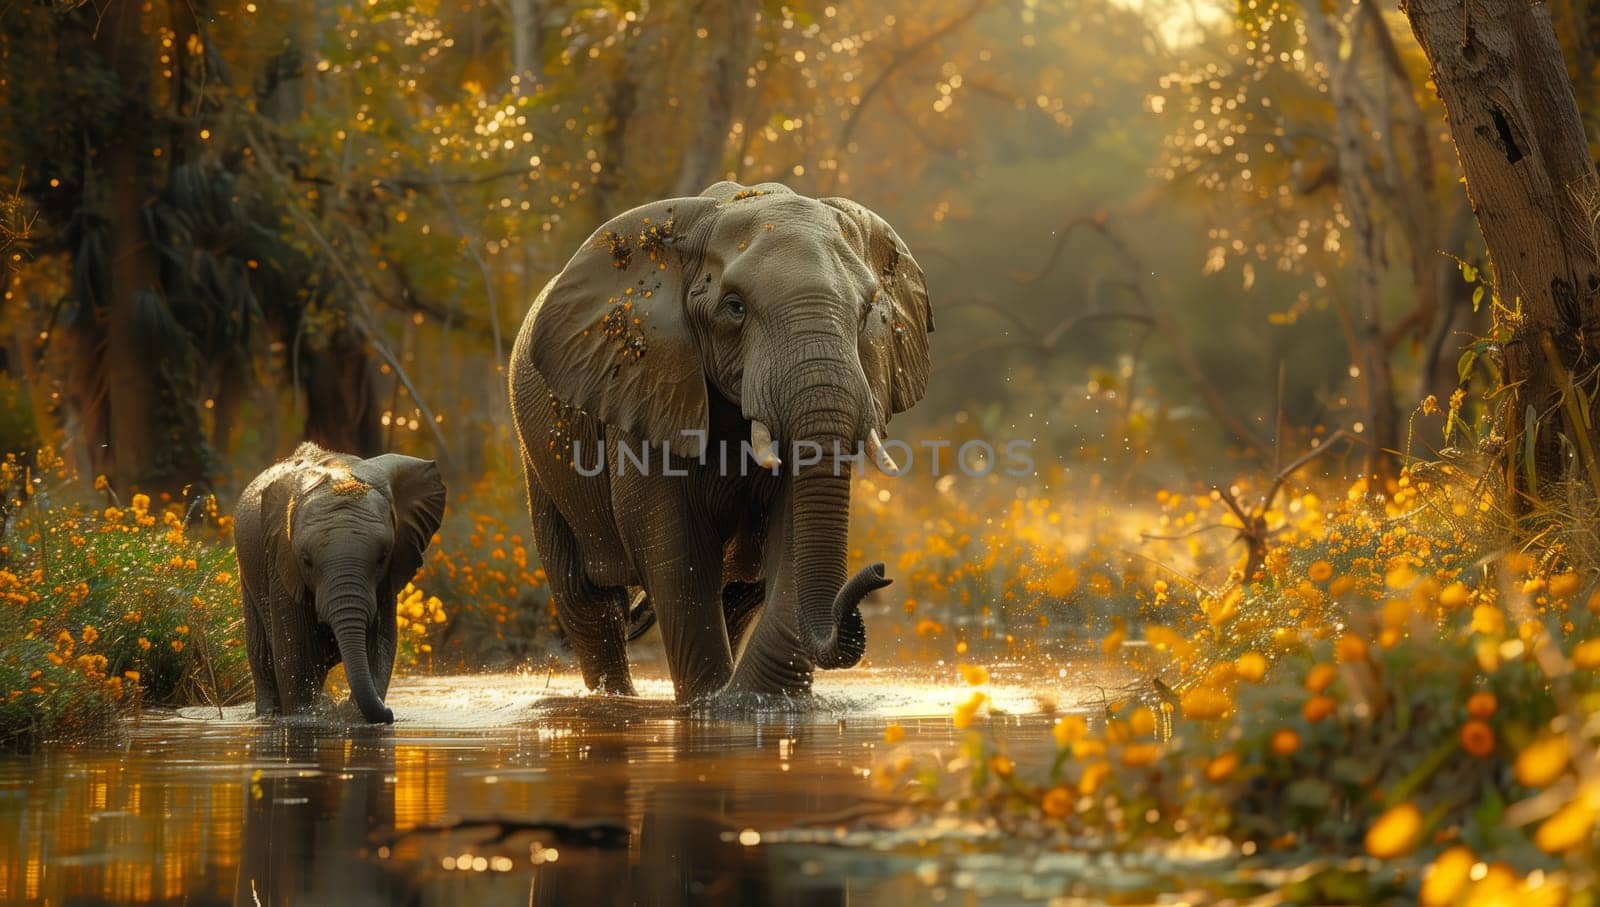 An elephant and a baby elephant wading through the river in a natural landscape by richwolf